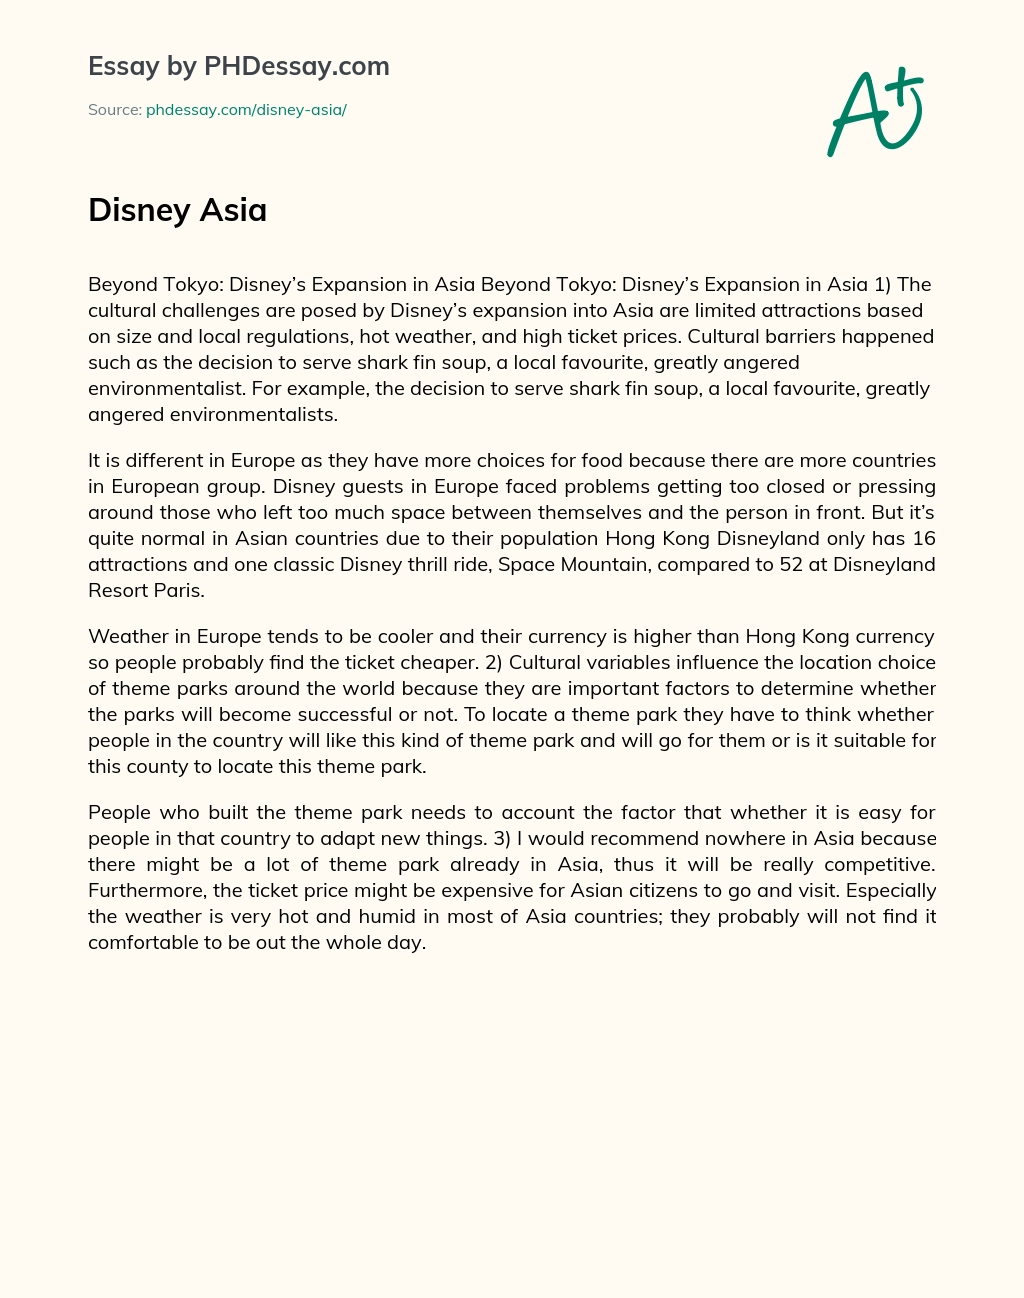 Disney’s Challenges in Expanding to Asia: Cultural Barriers and Limited Attractions essay